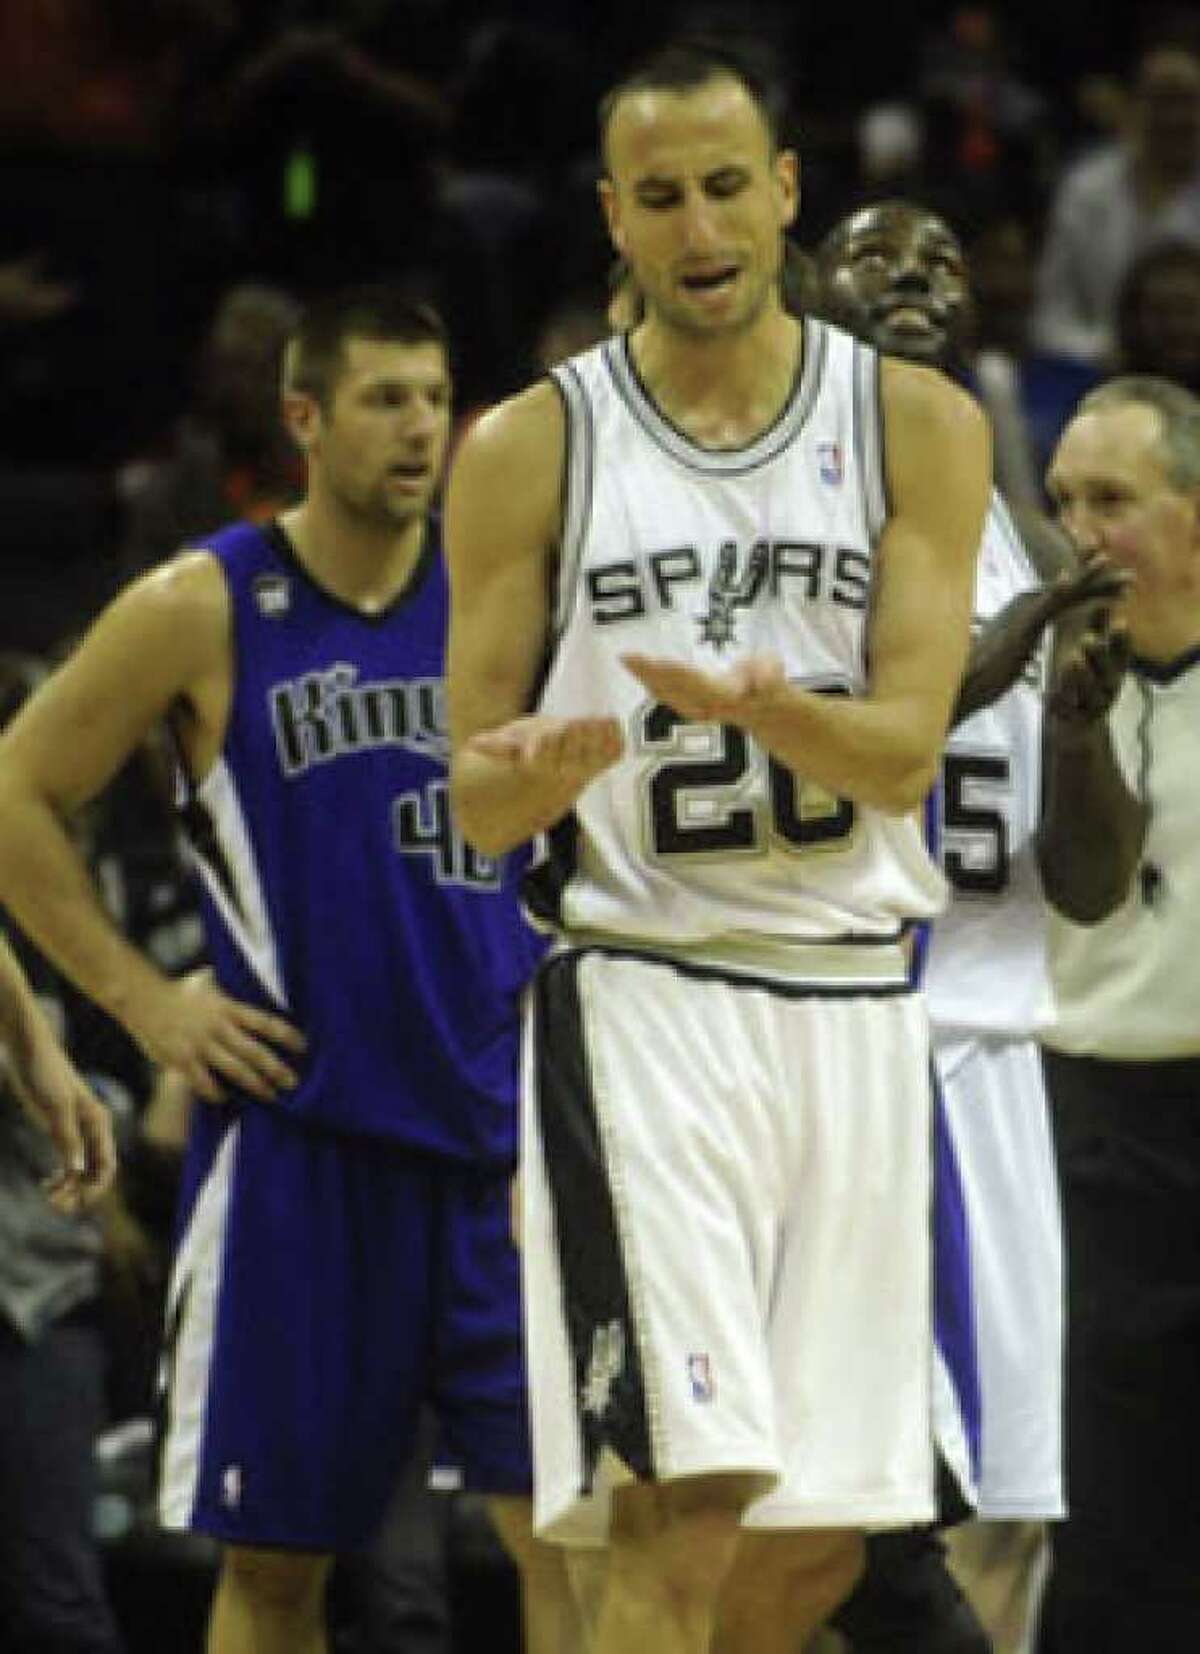 Manu Ginobili reacts after using hand sanitizer following the bat incident Saturday at the AT&T Center.